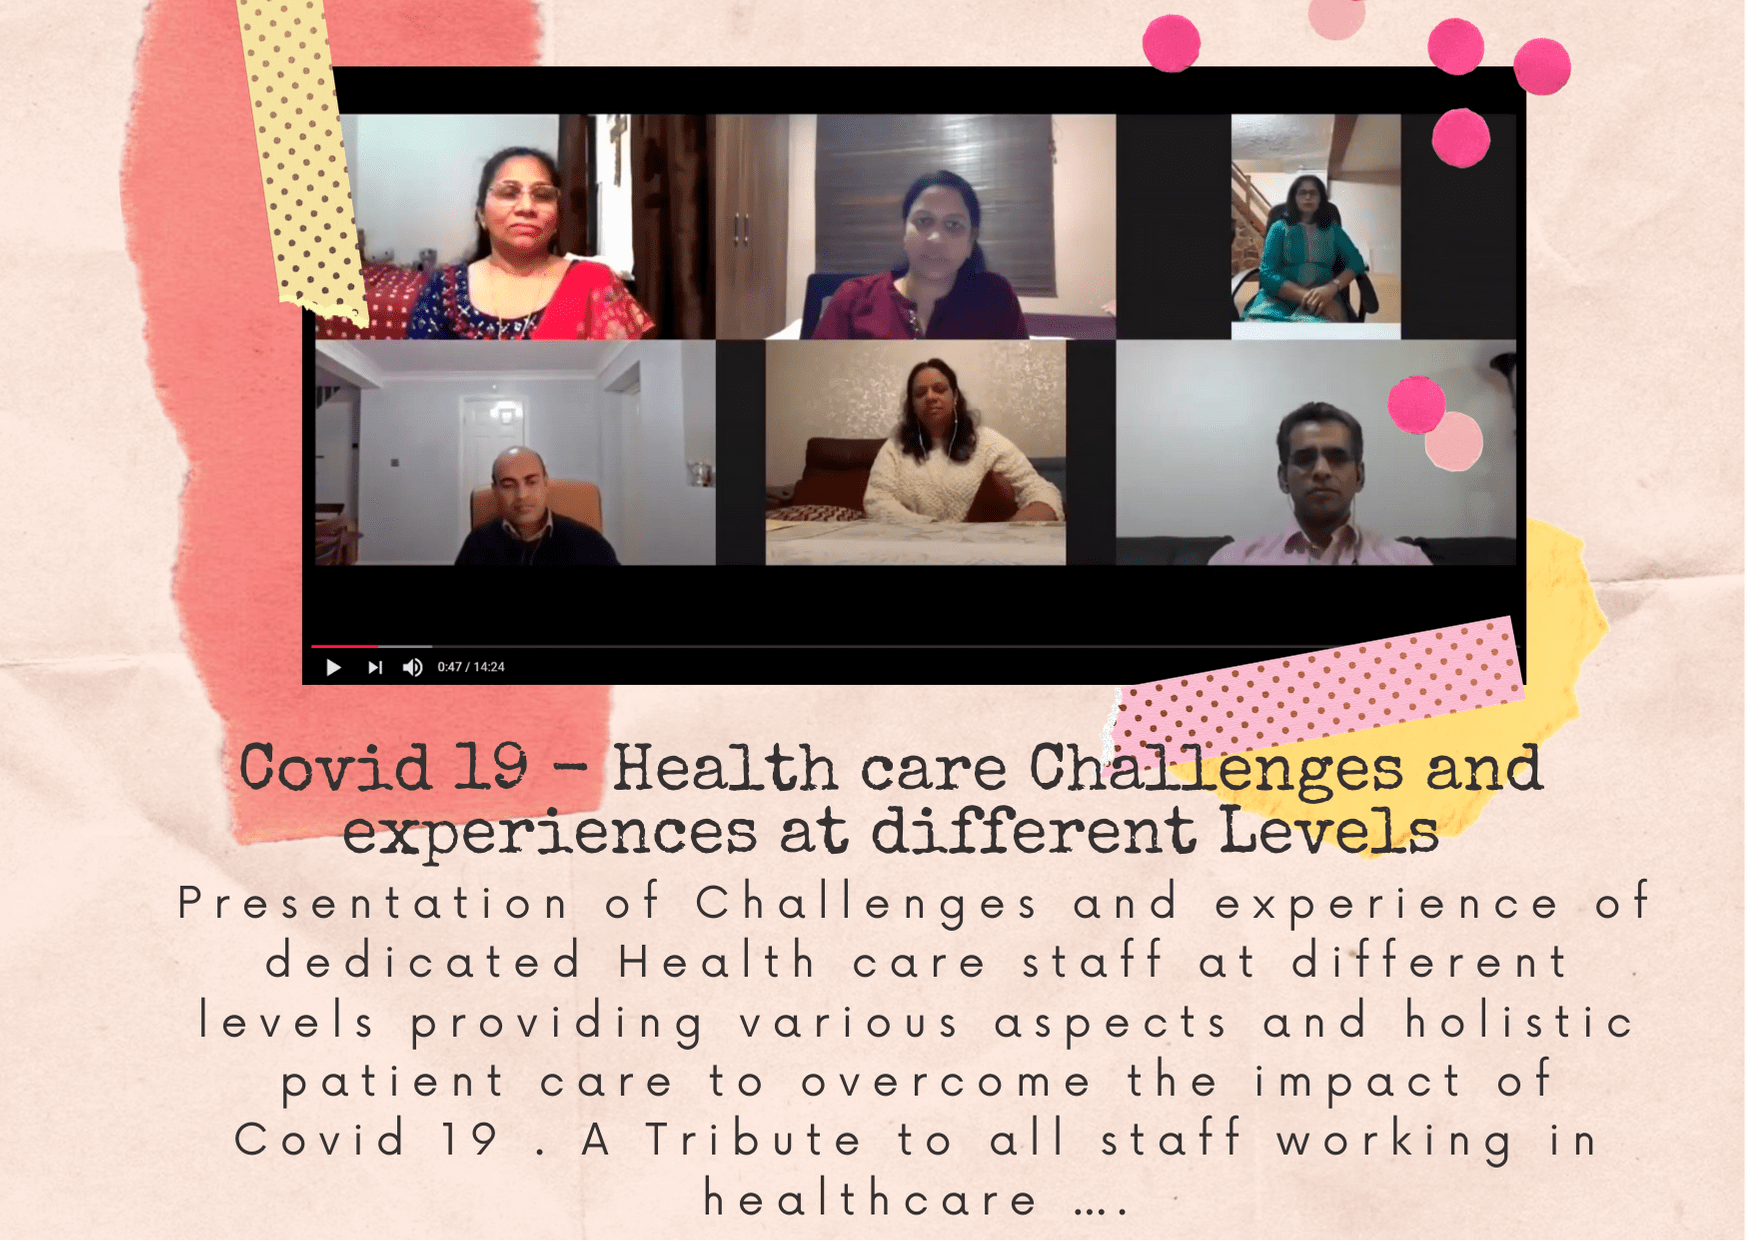 Episode 2:  Challenges and experience of dedicated Health care staff at different levels…